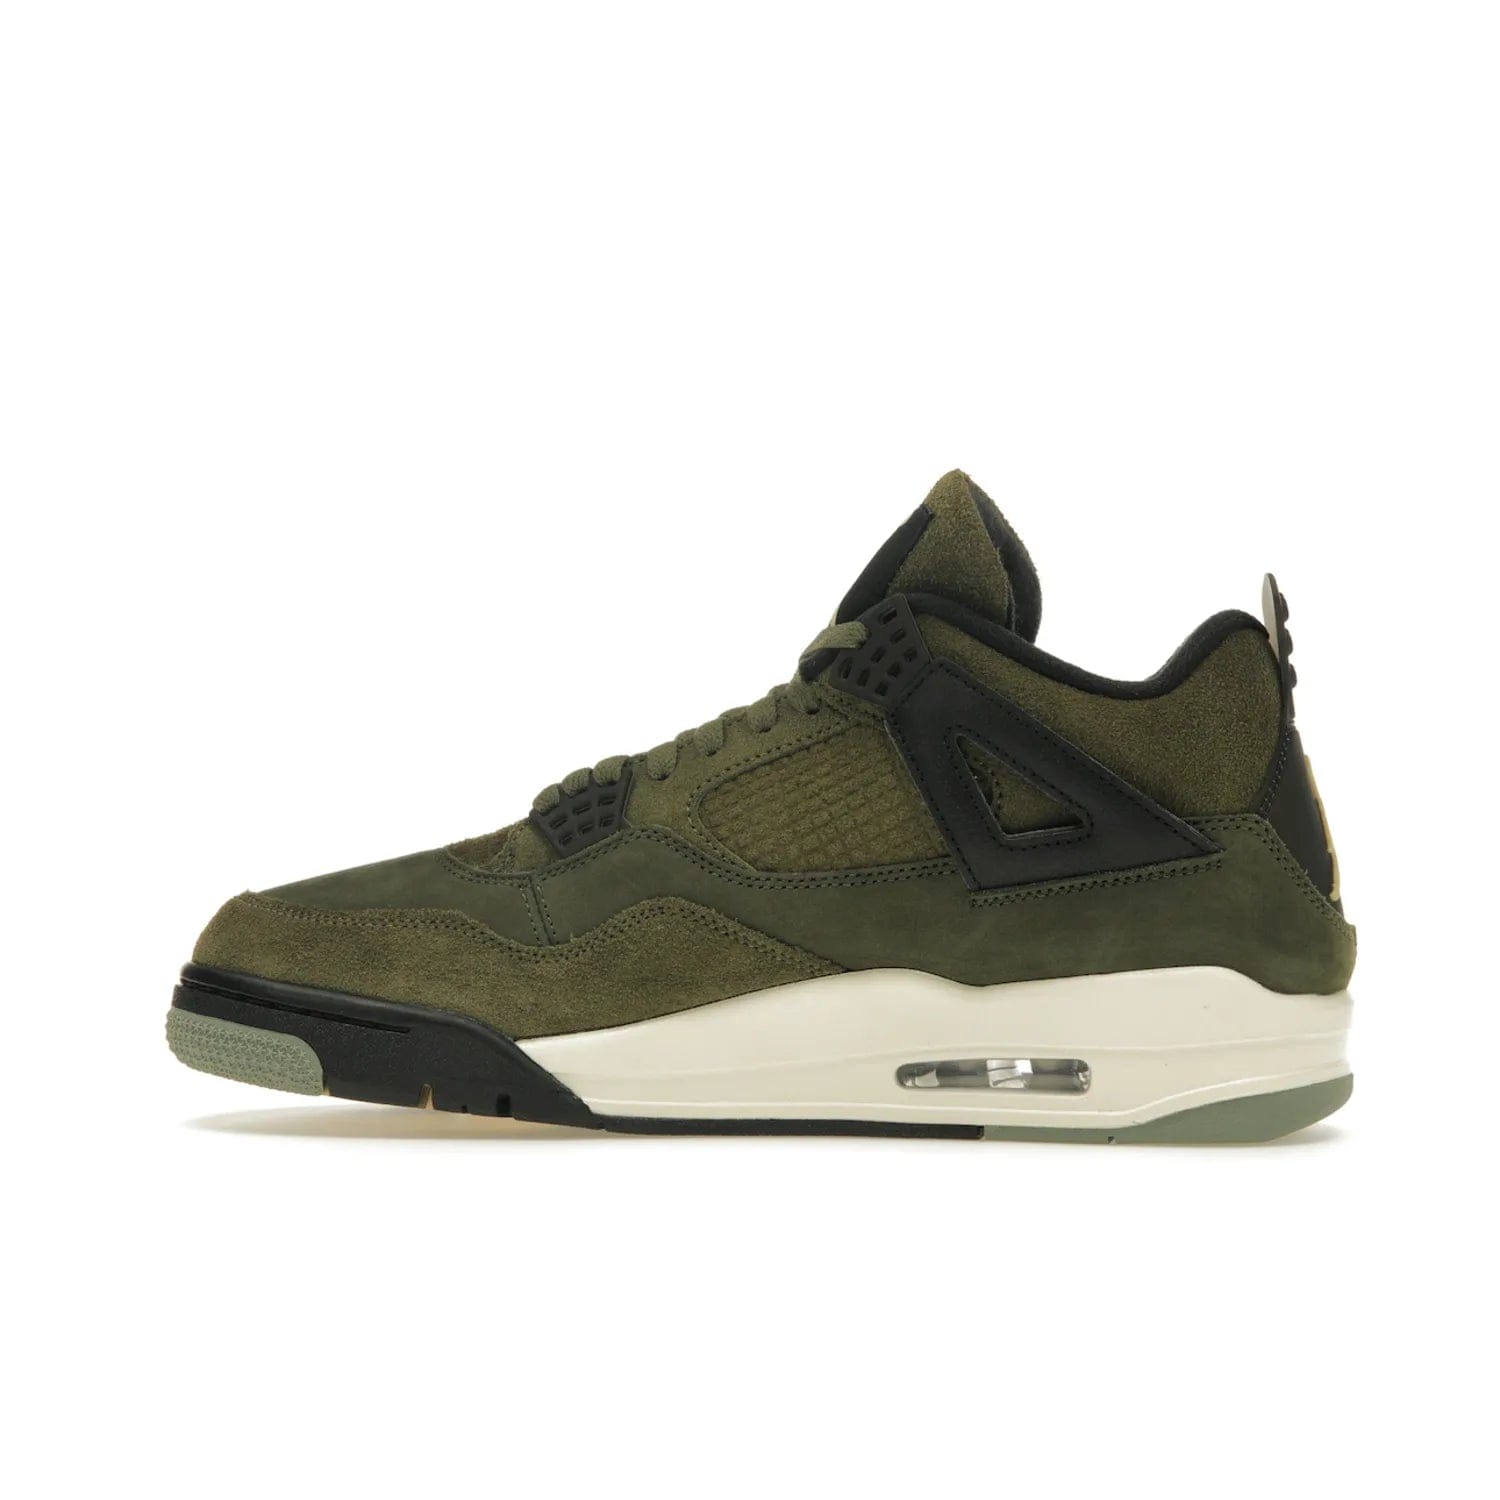 Jordan 4 Retro SE Craft Medium Olive - Image 20 - Only at www.BallersClubKickz.com - Grab the Jordan 4 Retro SE Crafts for a unique style. Combines Medium Olive, Pale Vanilla, Khaki, Black and Sail, with same classic shape, cushioning, and rubber outsole. Available on November 18th!